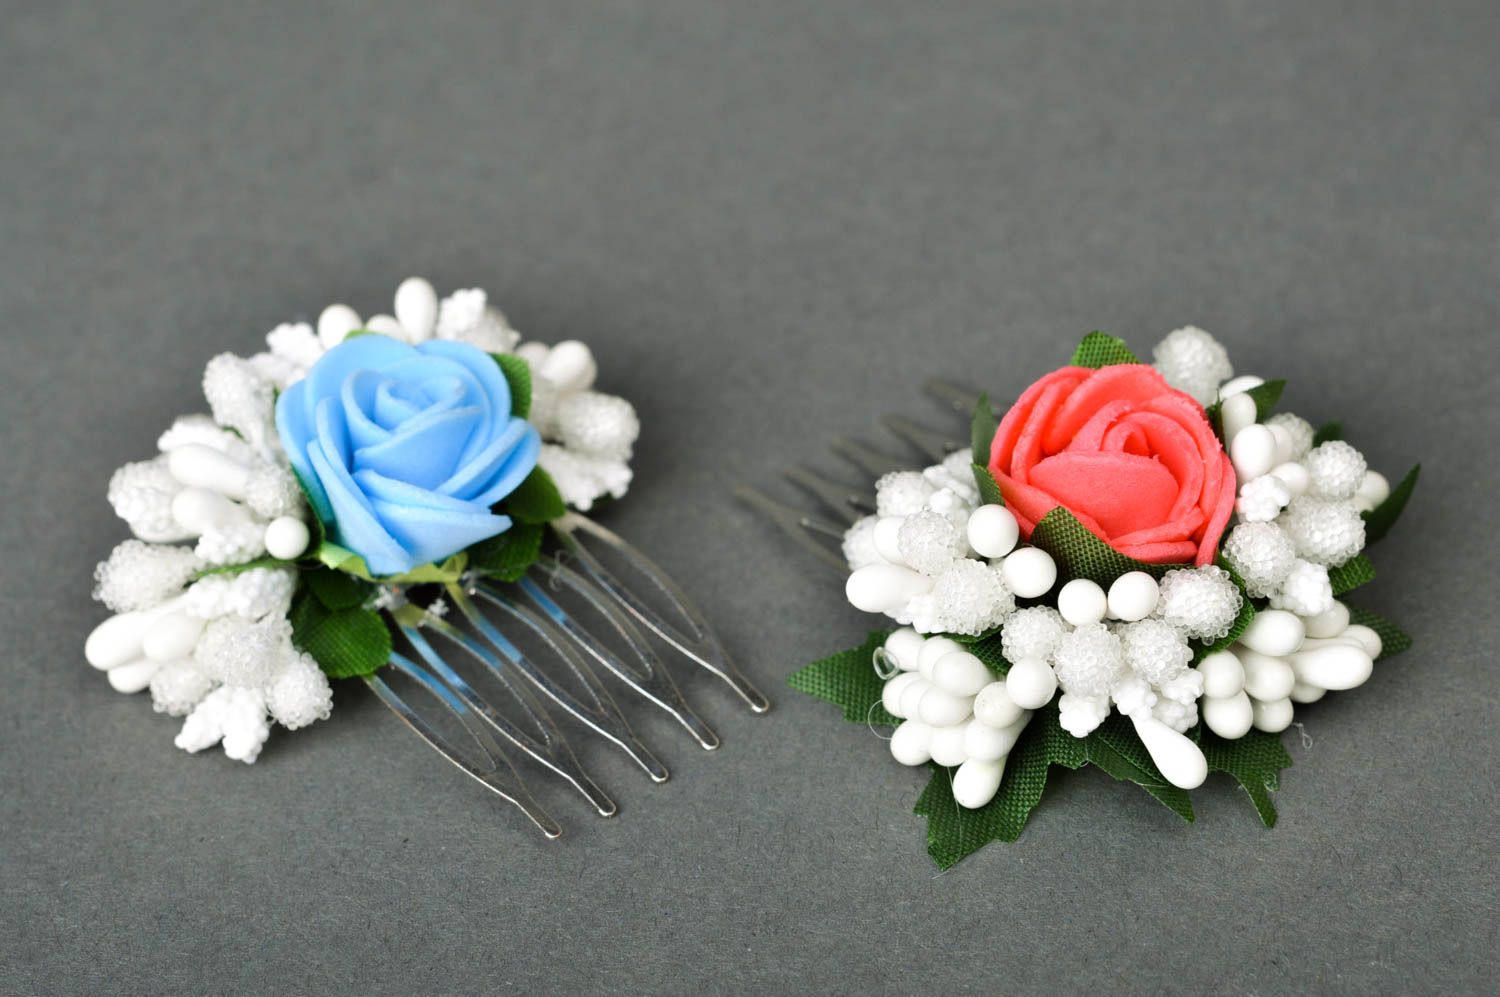 Handmade hair accessories 2 floral hair combs floral hair clips gifts for girls photo 5